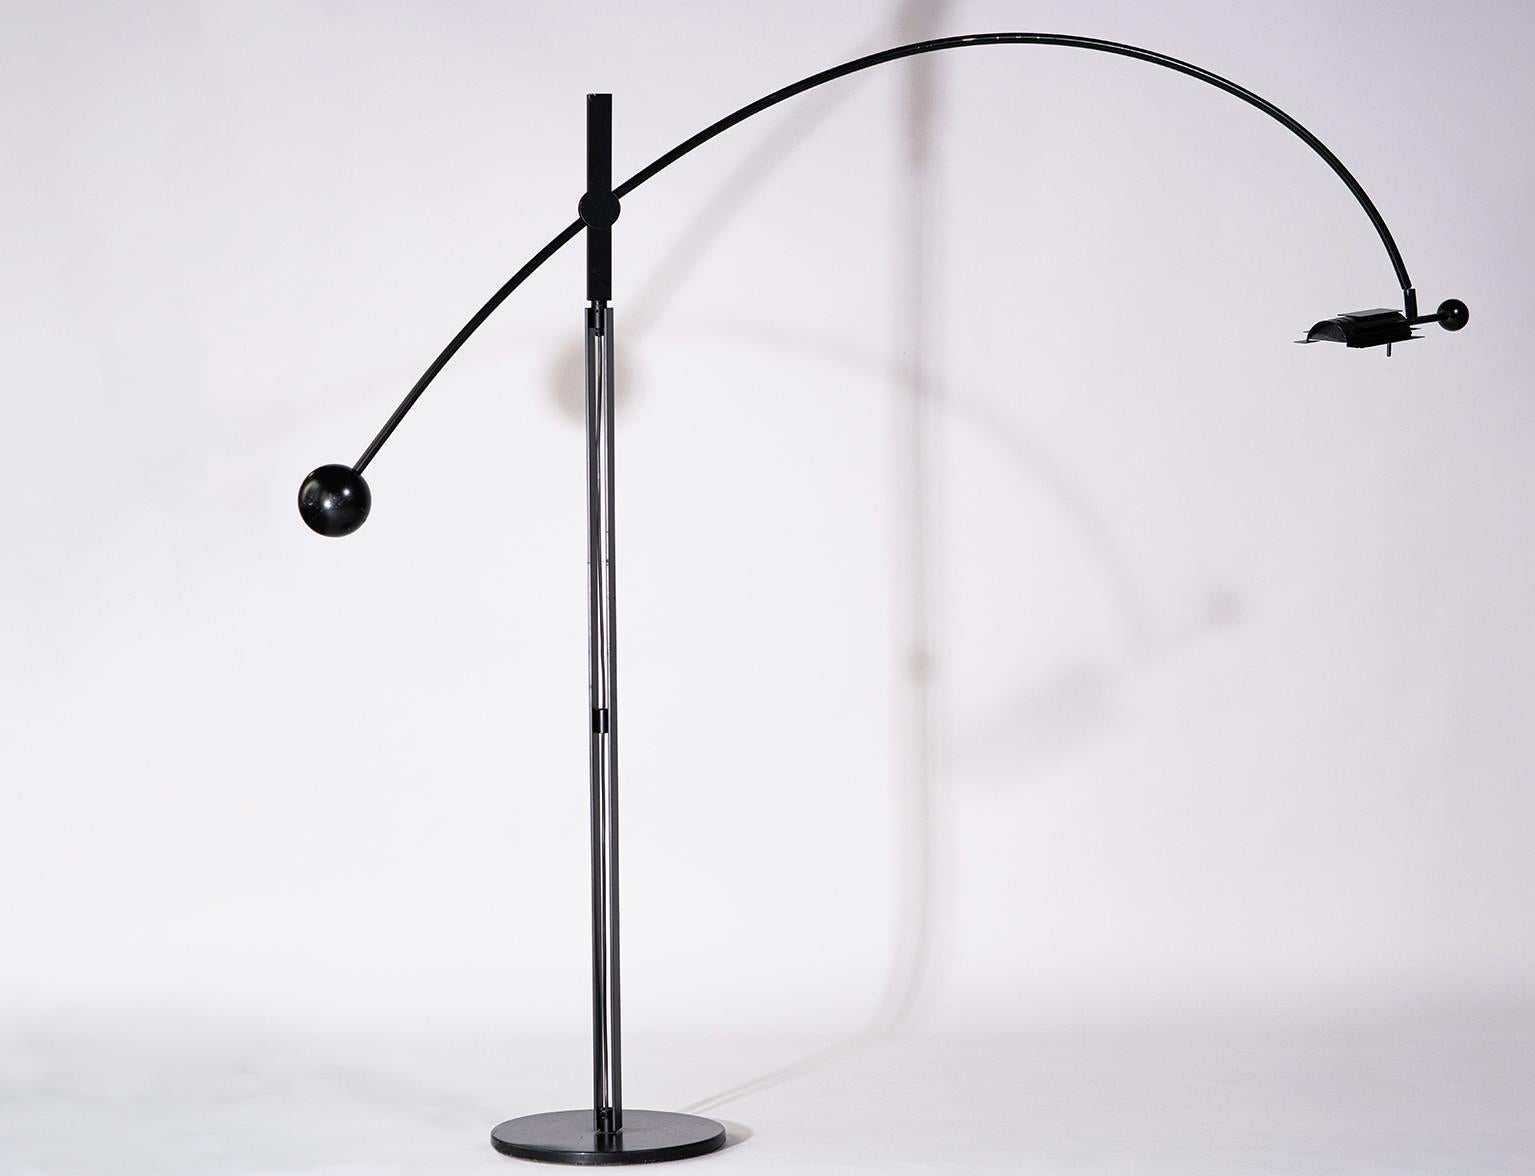 20th Century Swiss Perfection, 1980/90s Floor Lamp, Model 8023 by Swisslamp International For Sale